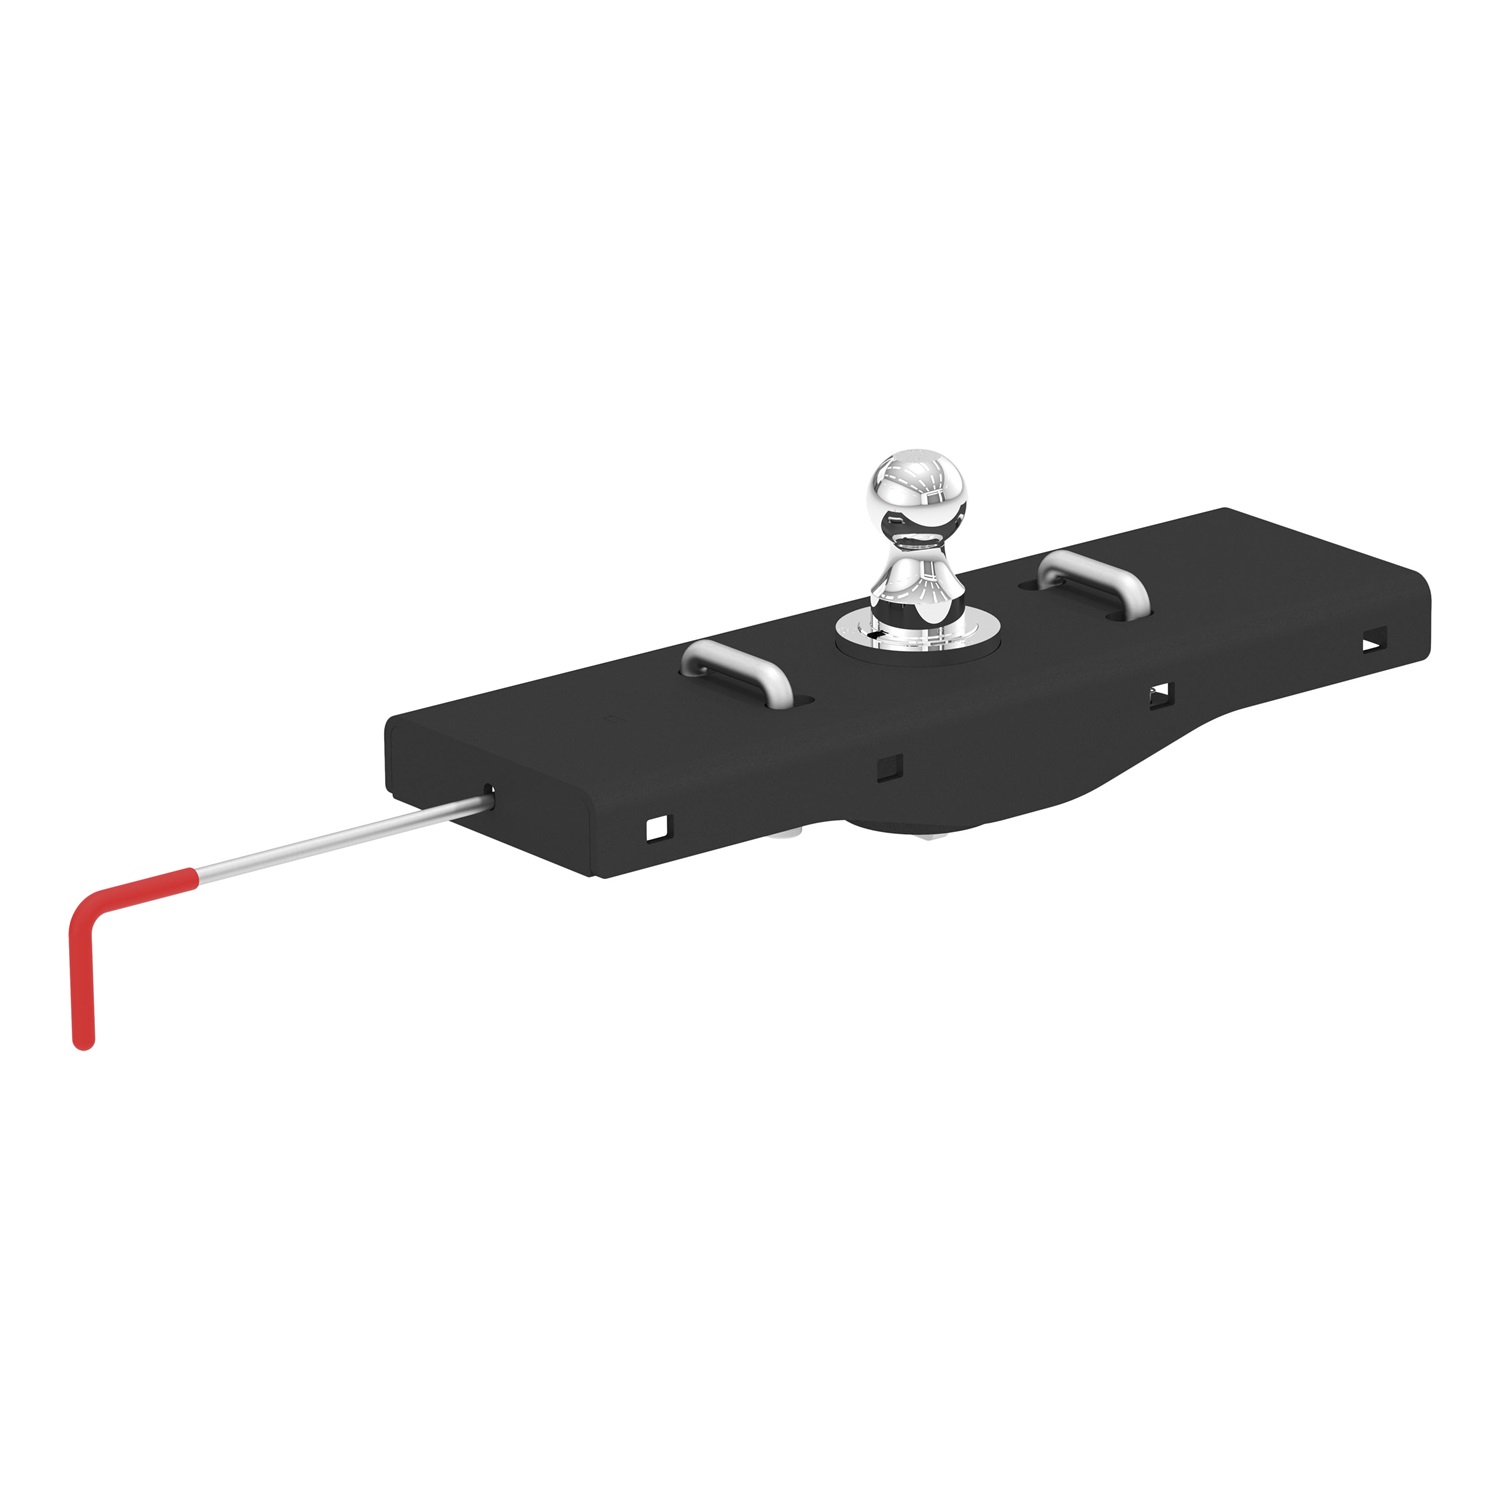 CURT Manufacturing CURT Manufacturing 60612 Under-Bed Double Lock; Gooseneck Hitch